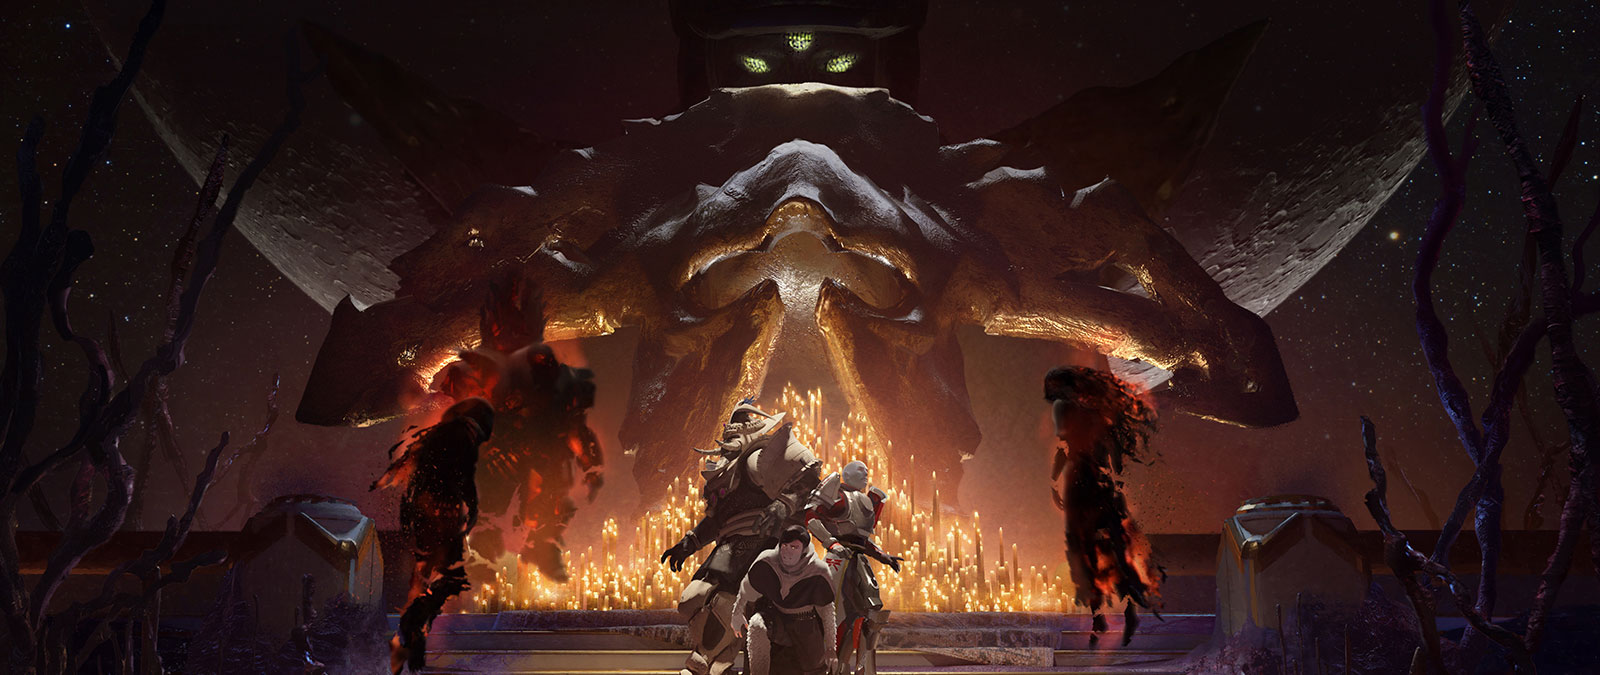 Three Nightmare bosses approach a group of scared players surrounded by lit candles, as The Leviathan watches in the background. 